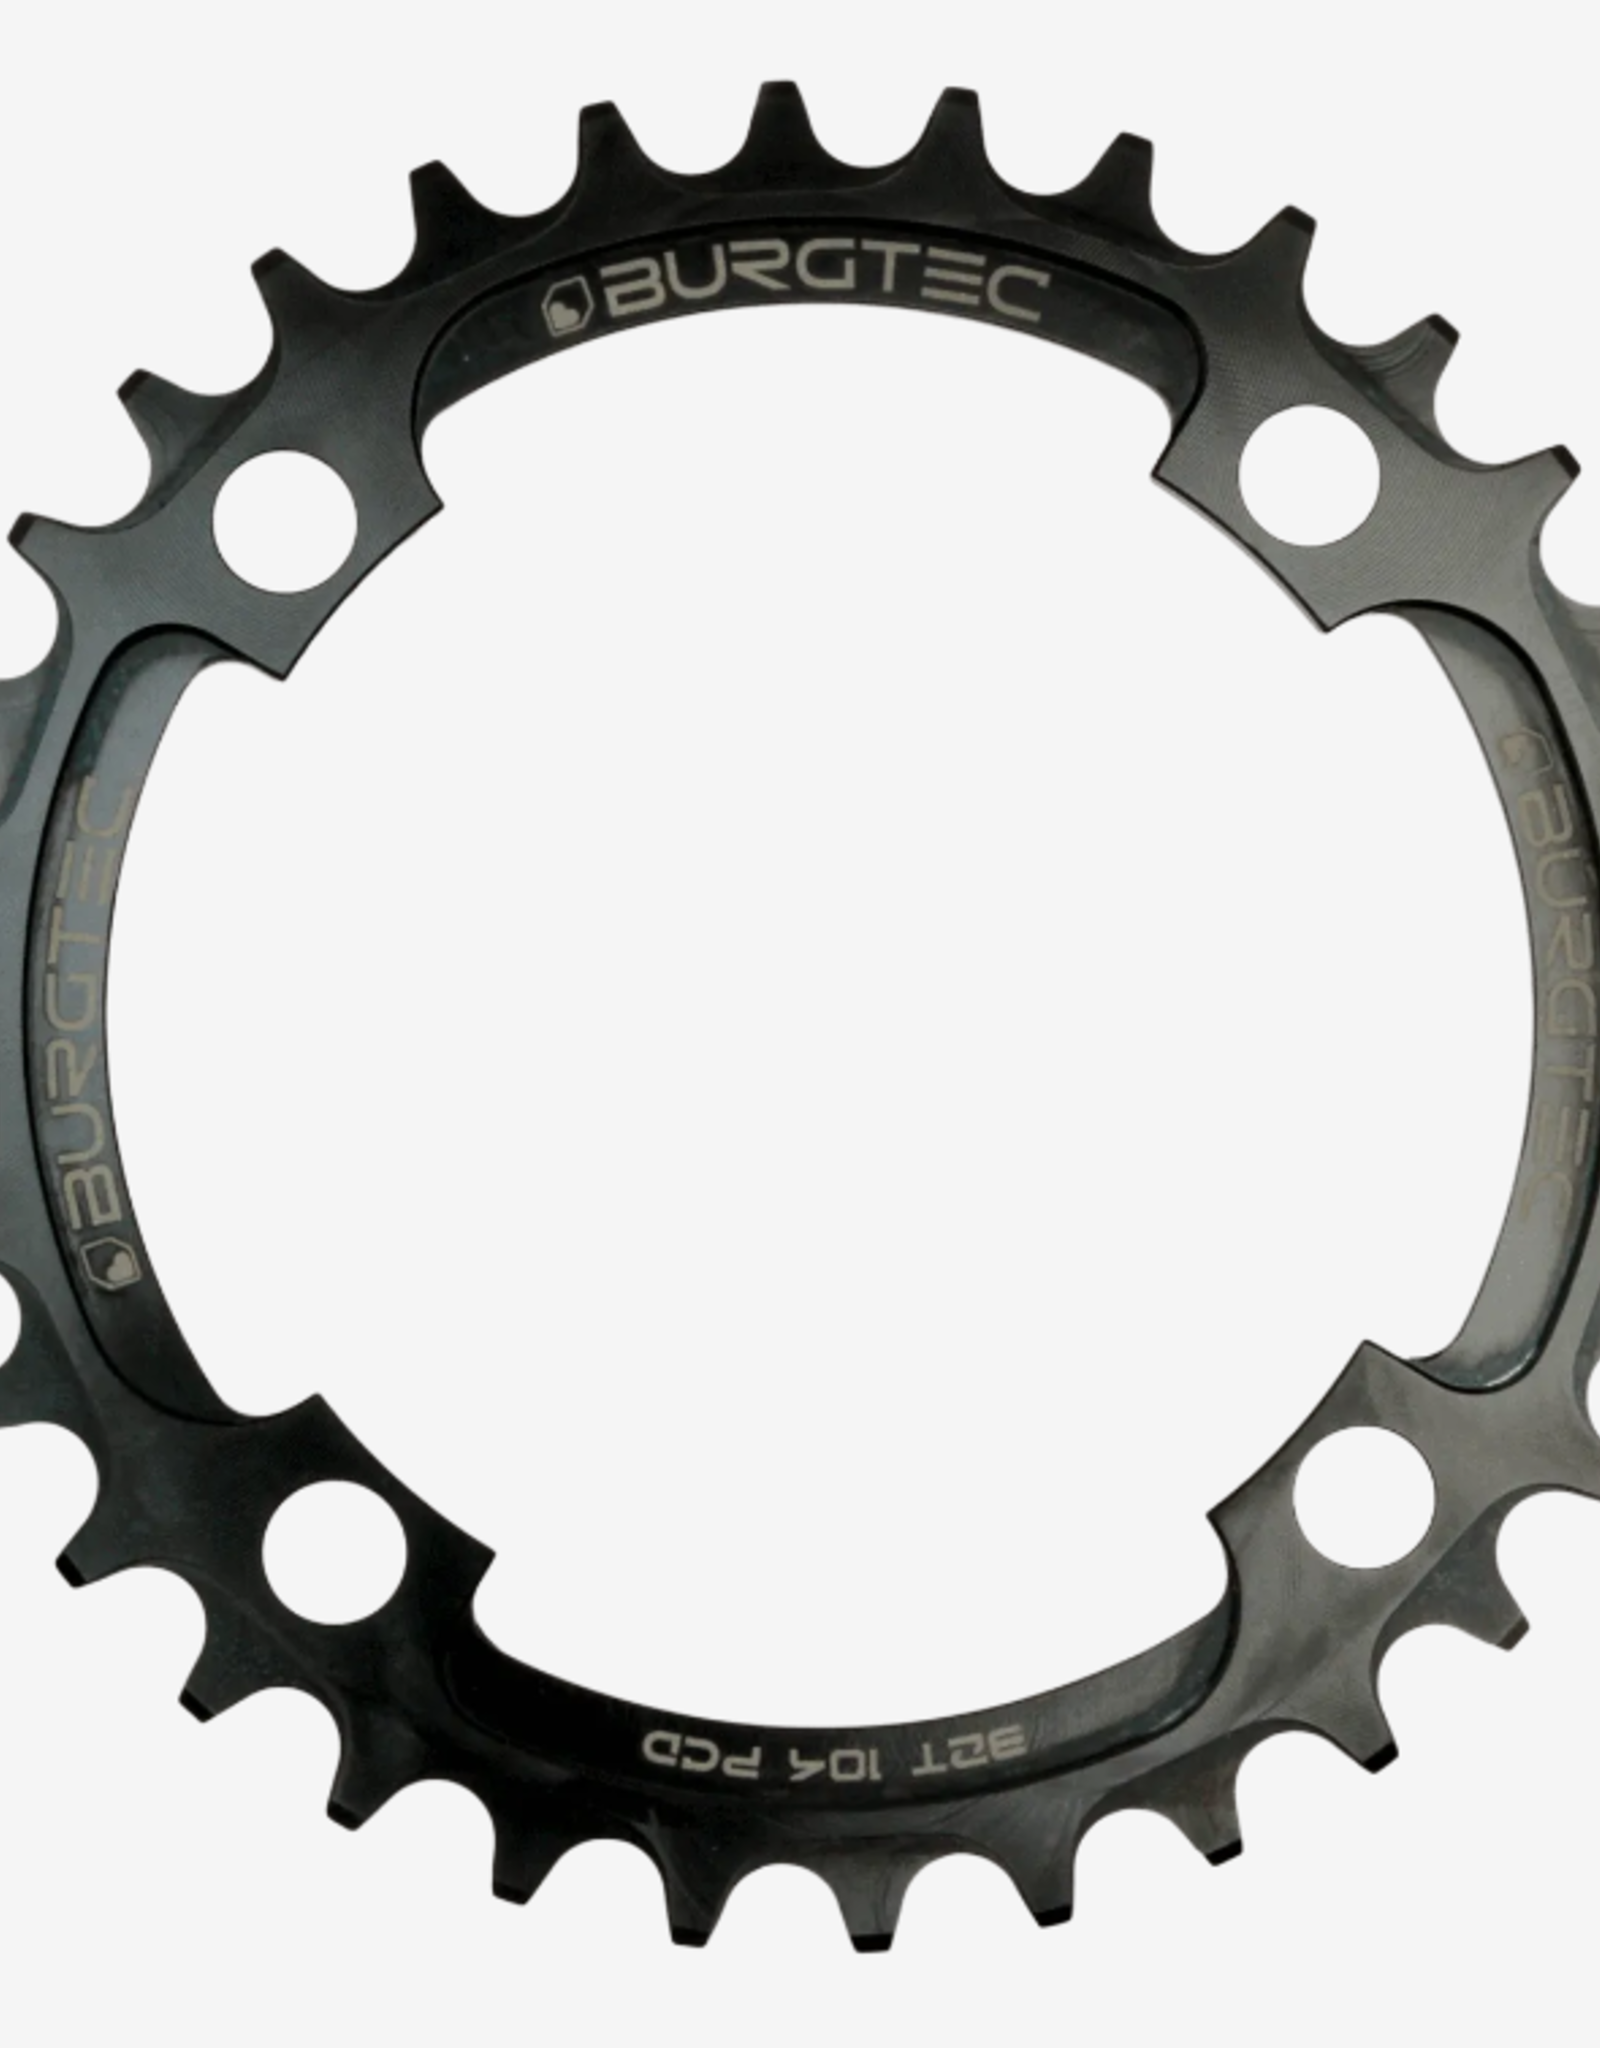 Burgtec 104 BCD Thick Thin Chainring